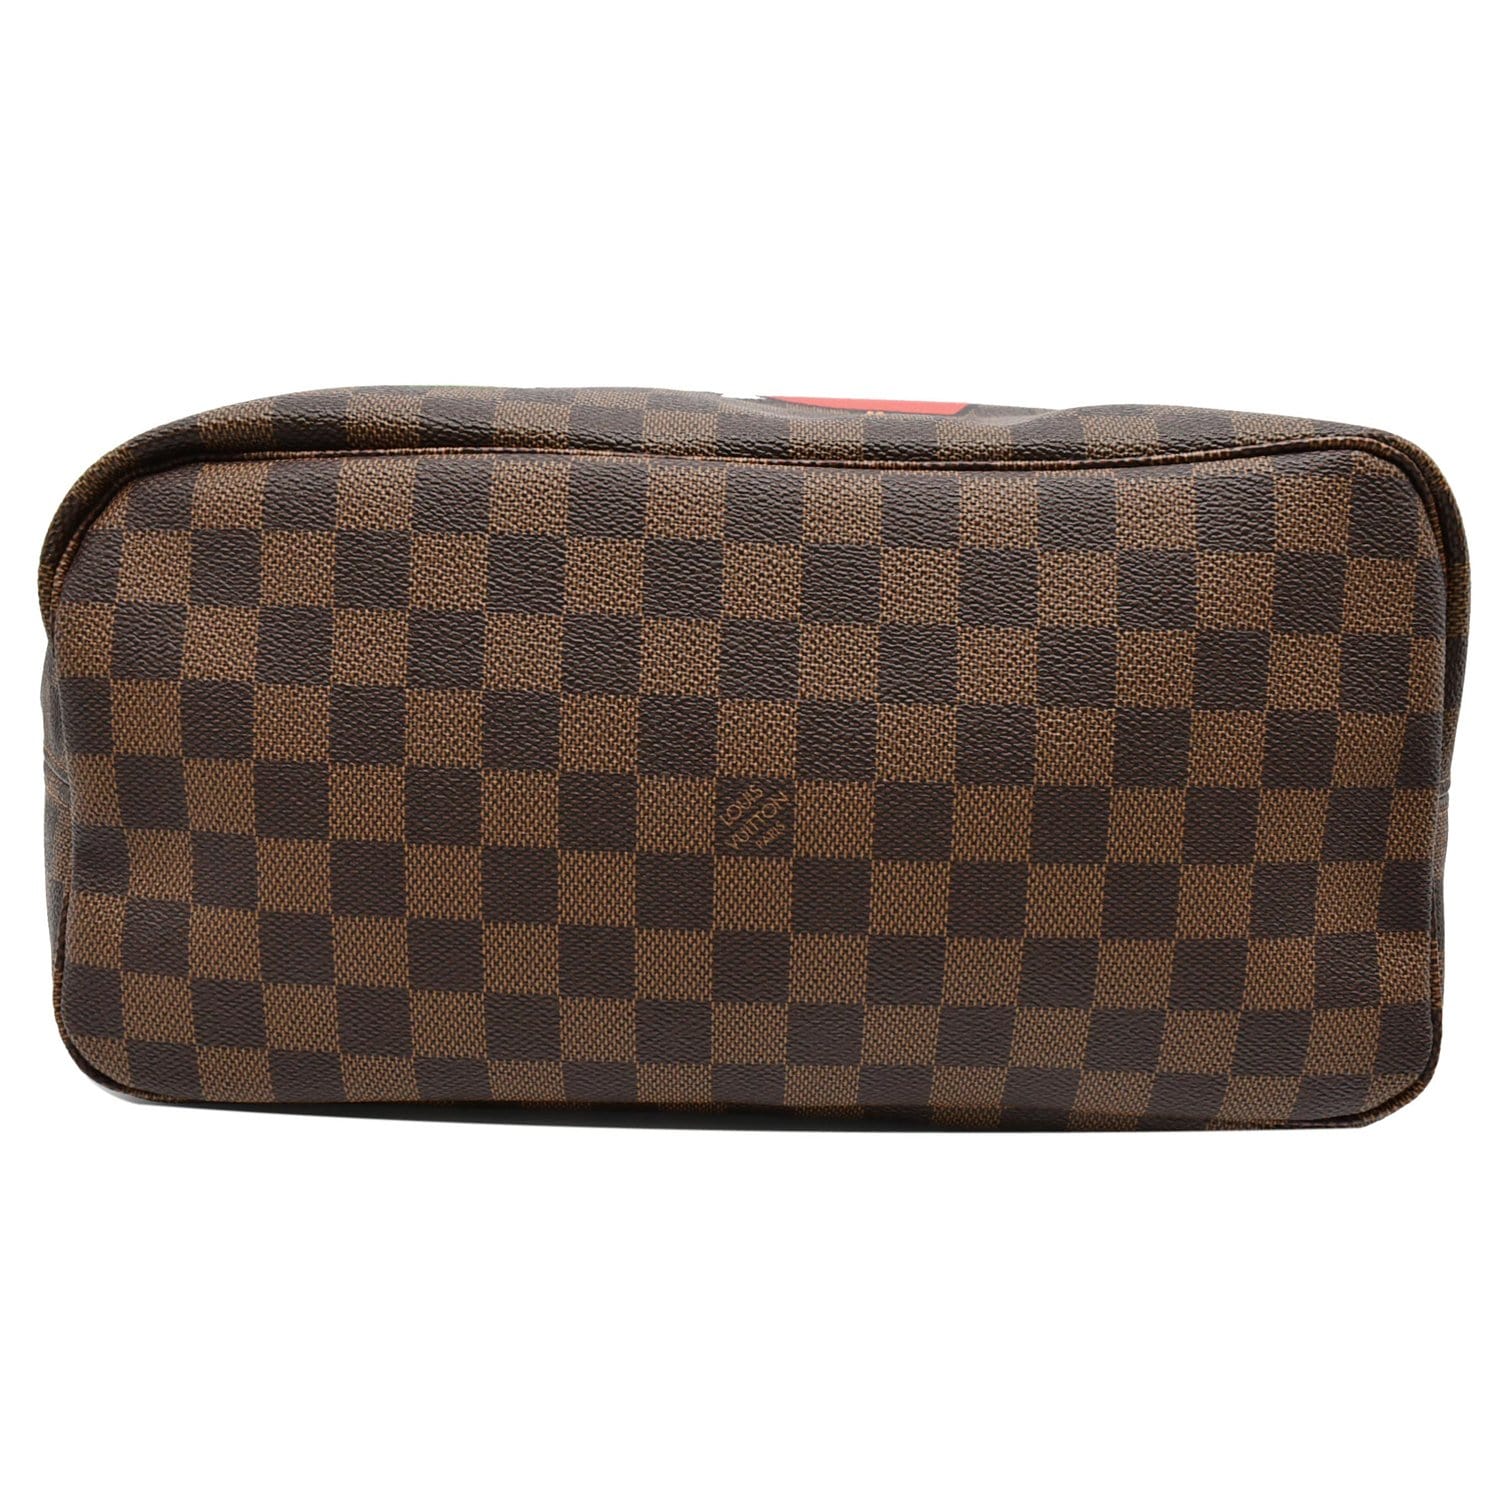 More Louis Vuitton Patches For Epi and Damier Ebene Bags - Spotted